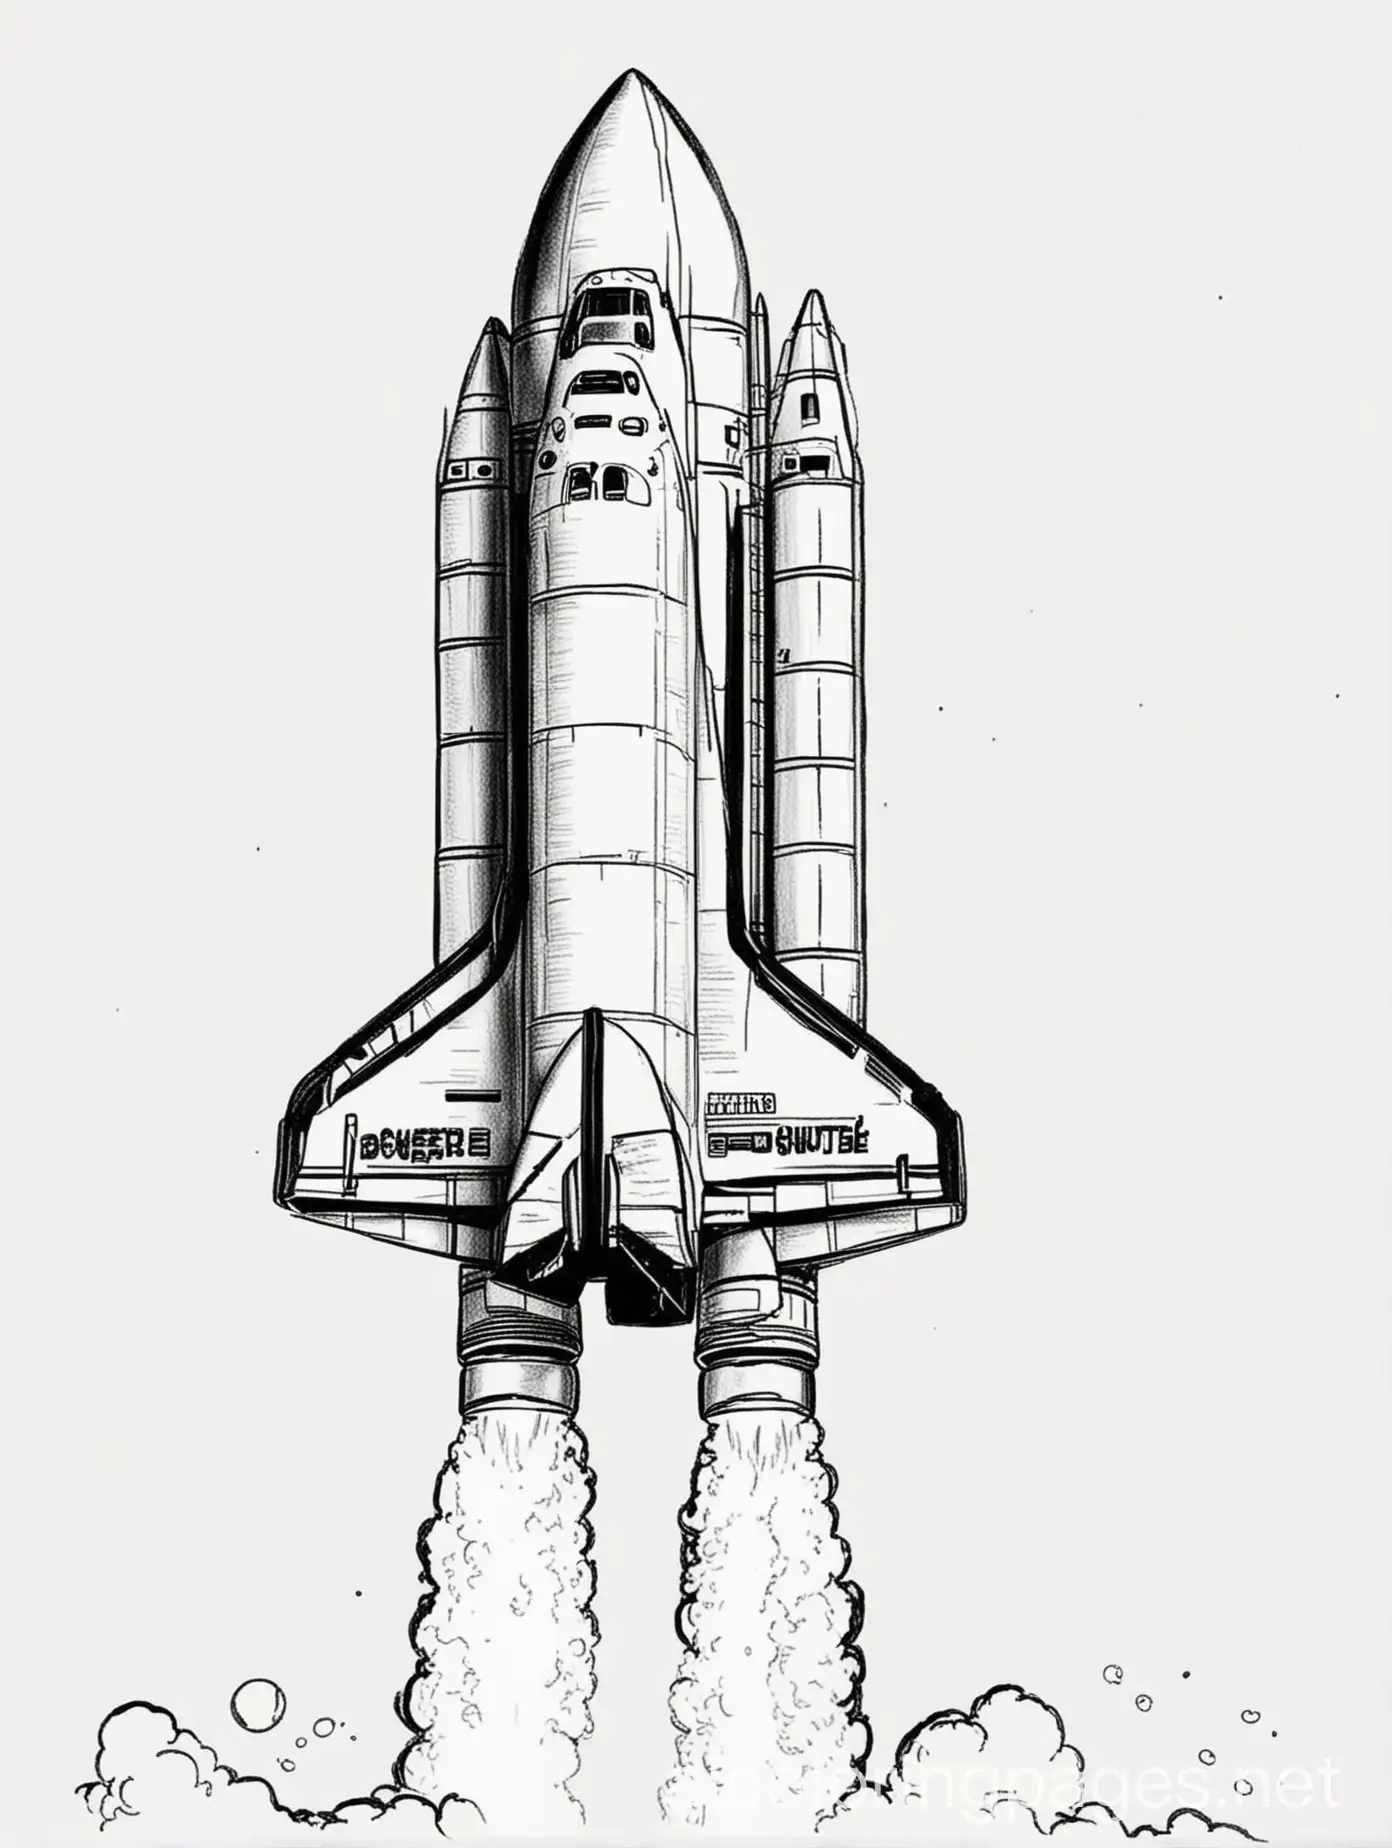 A space shuttle launching into orbit from a space center, coloring page, black and white, line art, white background, Simplicity, Ample White Space. The background of the coloring page is plain white to make it easier for children to color within the lines. The outlines of all the subjects are easy to distinguish, making it simple for kids to color without too much difficulty